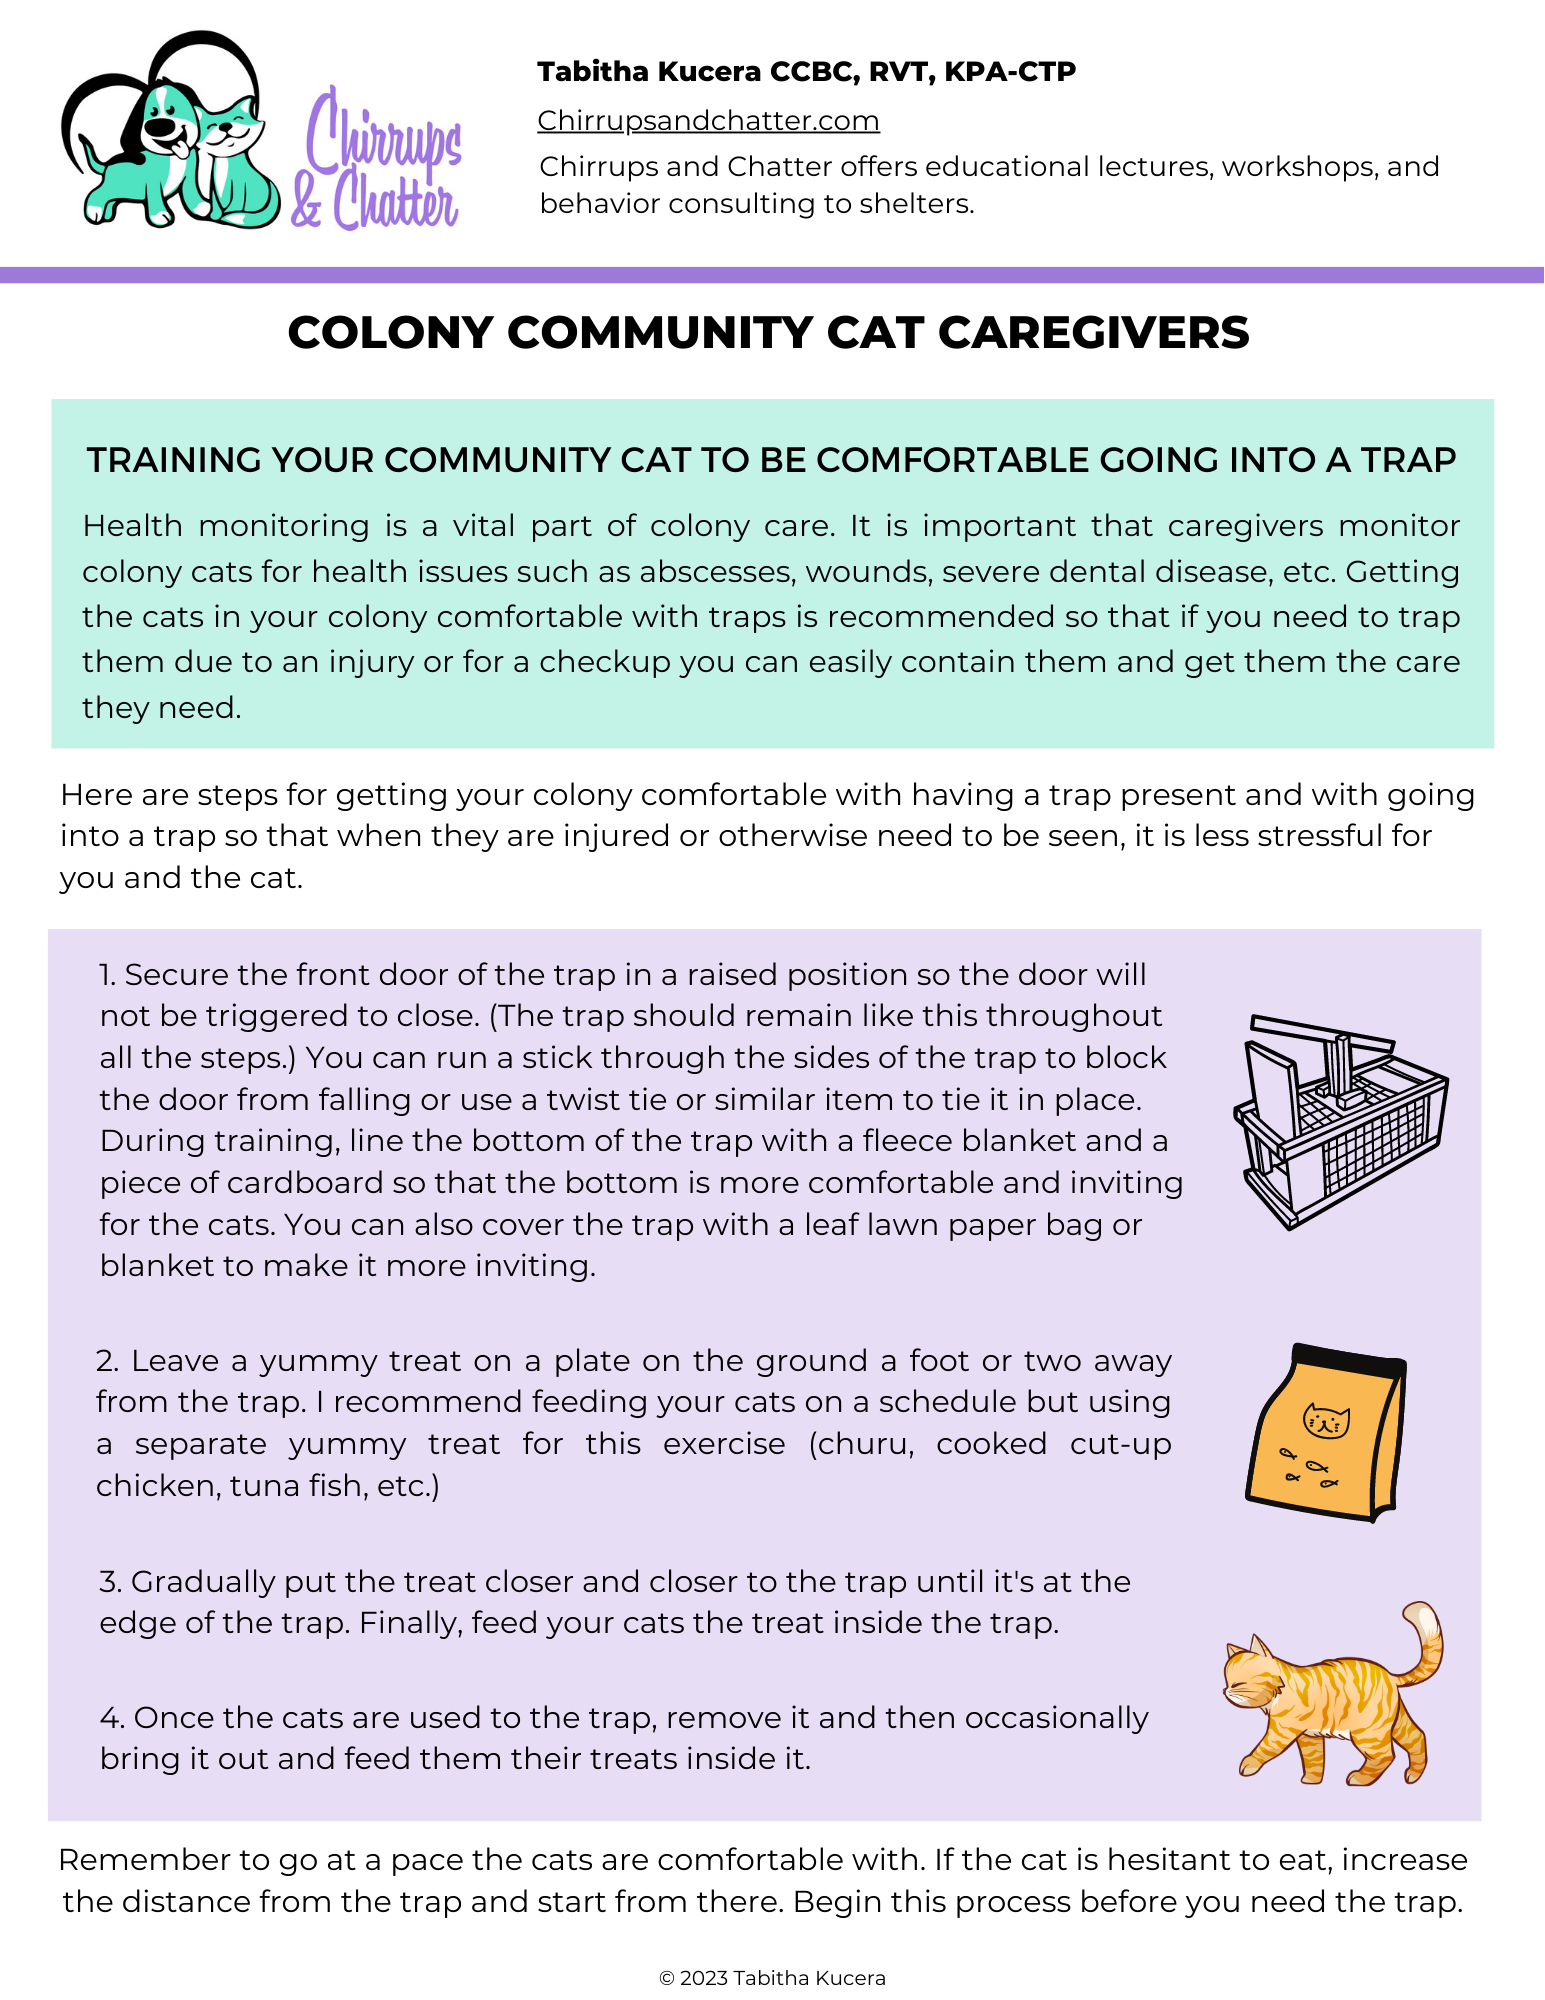 colony community cat caregivers handout. Learn about training your community cat to be comfortable going into a trap. Step by step guide